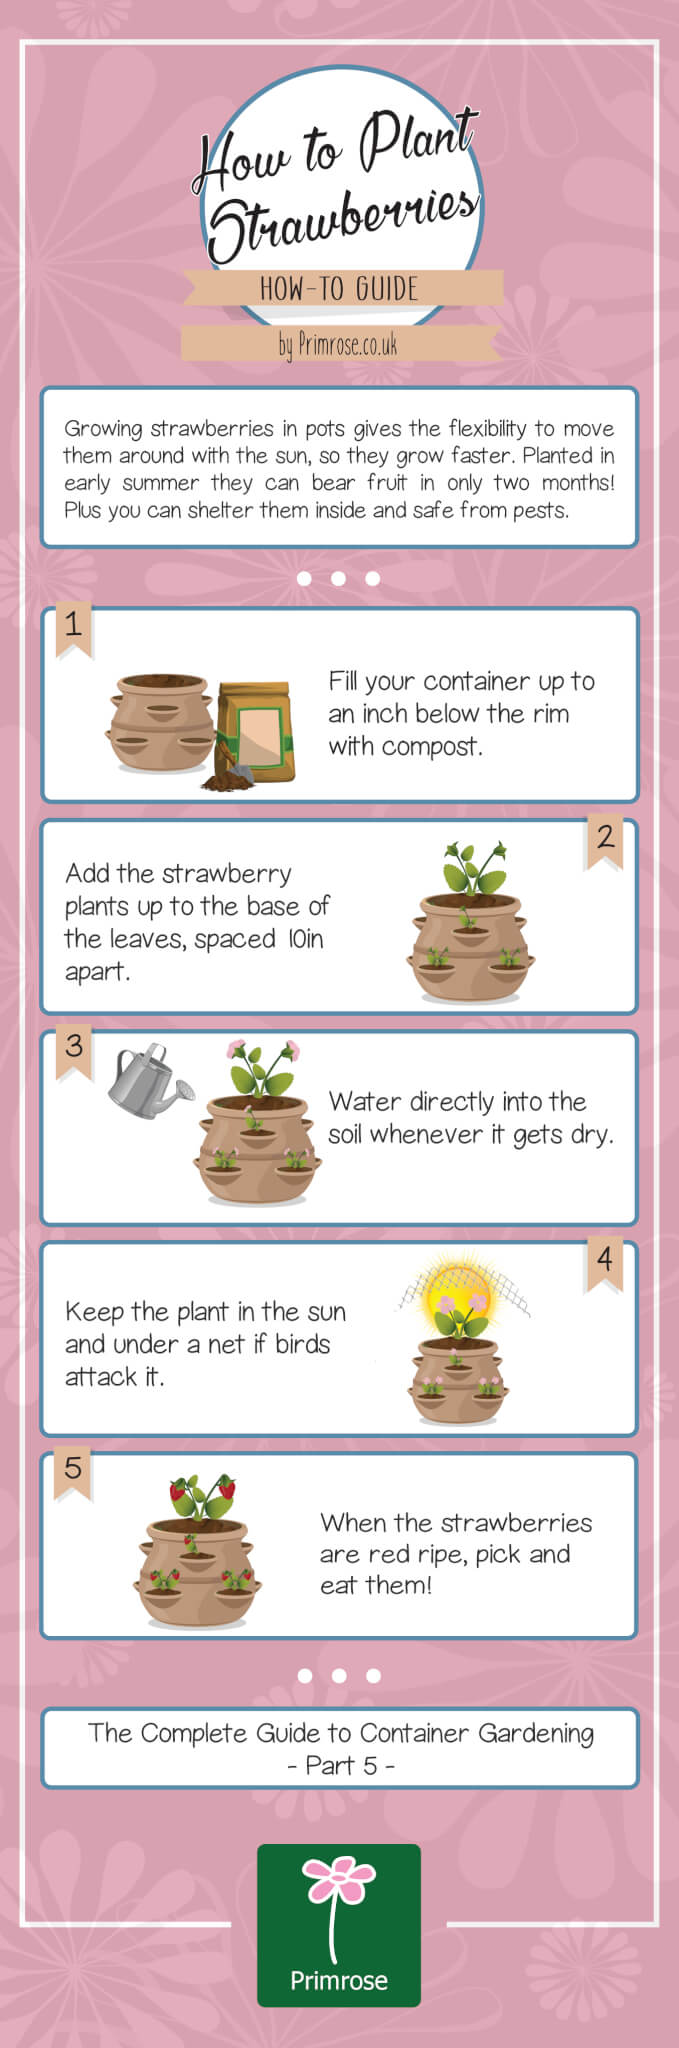 How to plant strawberries infographic